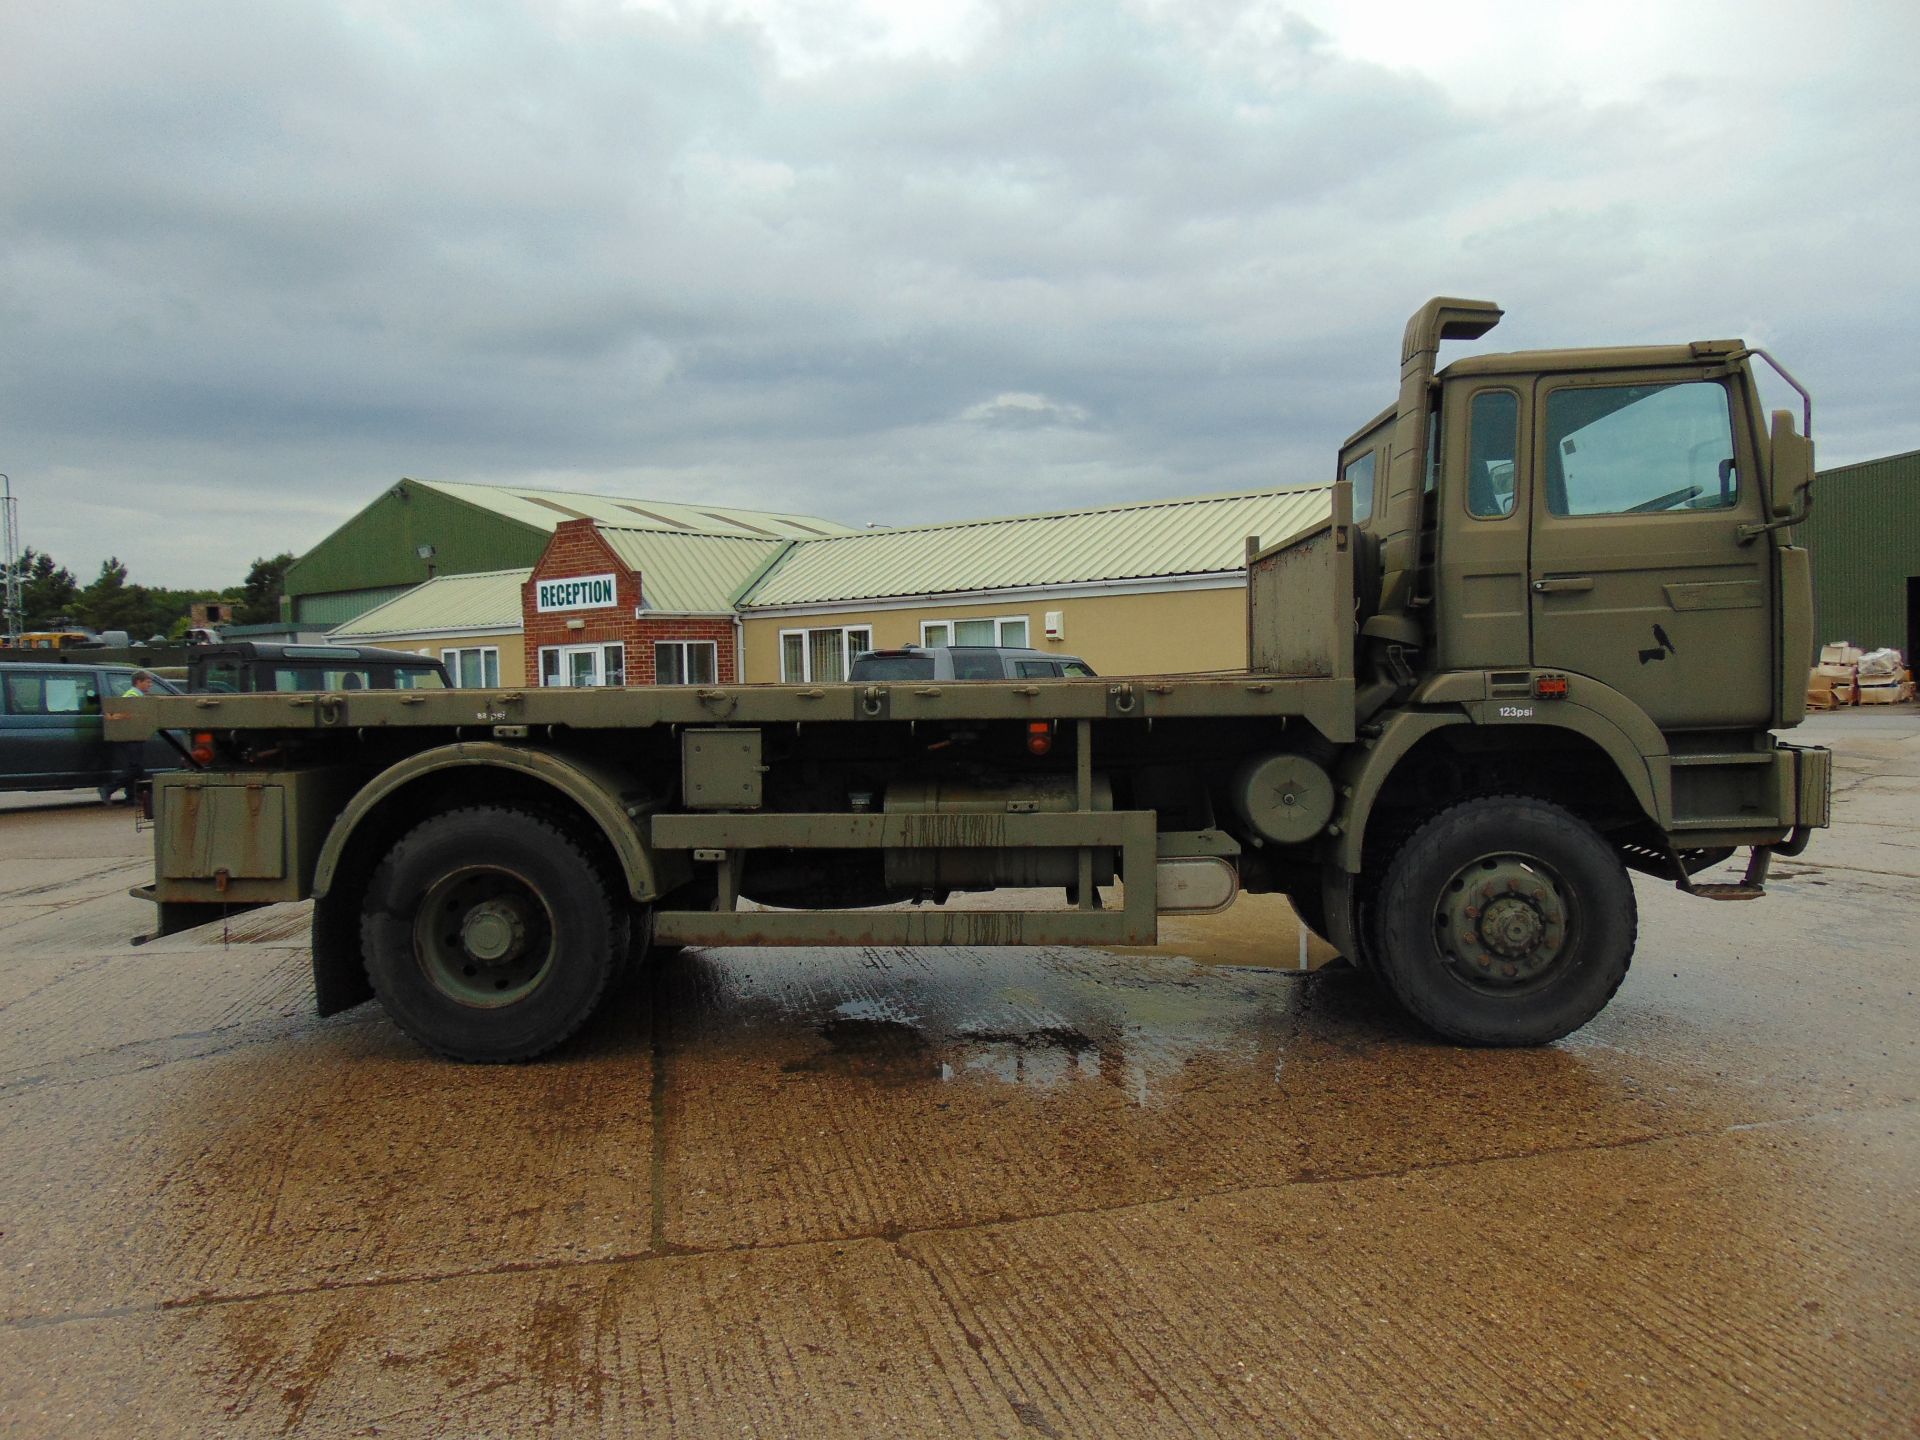 Renault G300 Maxter RHD 4x4 8T Cargo Truck complete with winch - Image 6 of 16